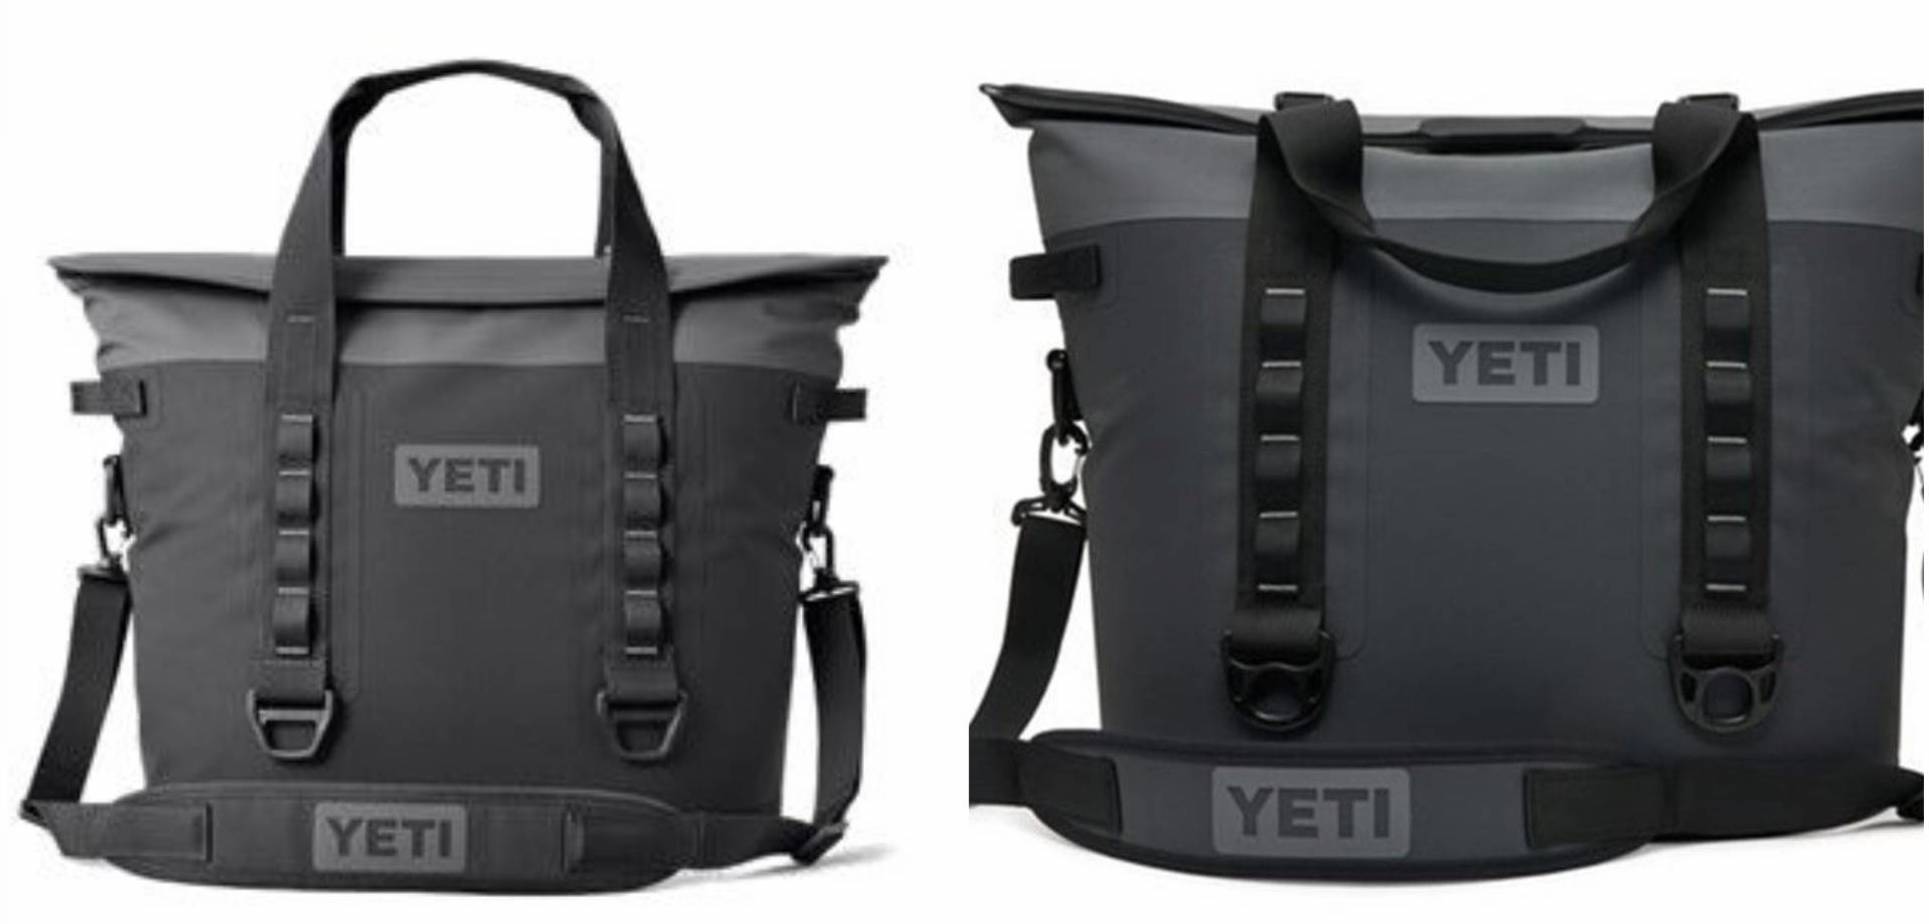 YETI coolers recalled over magnets